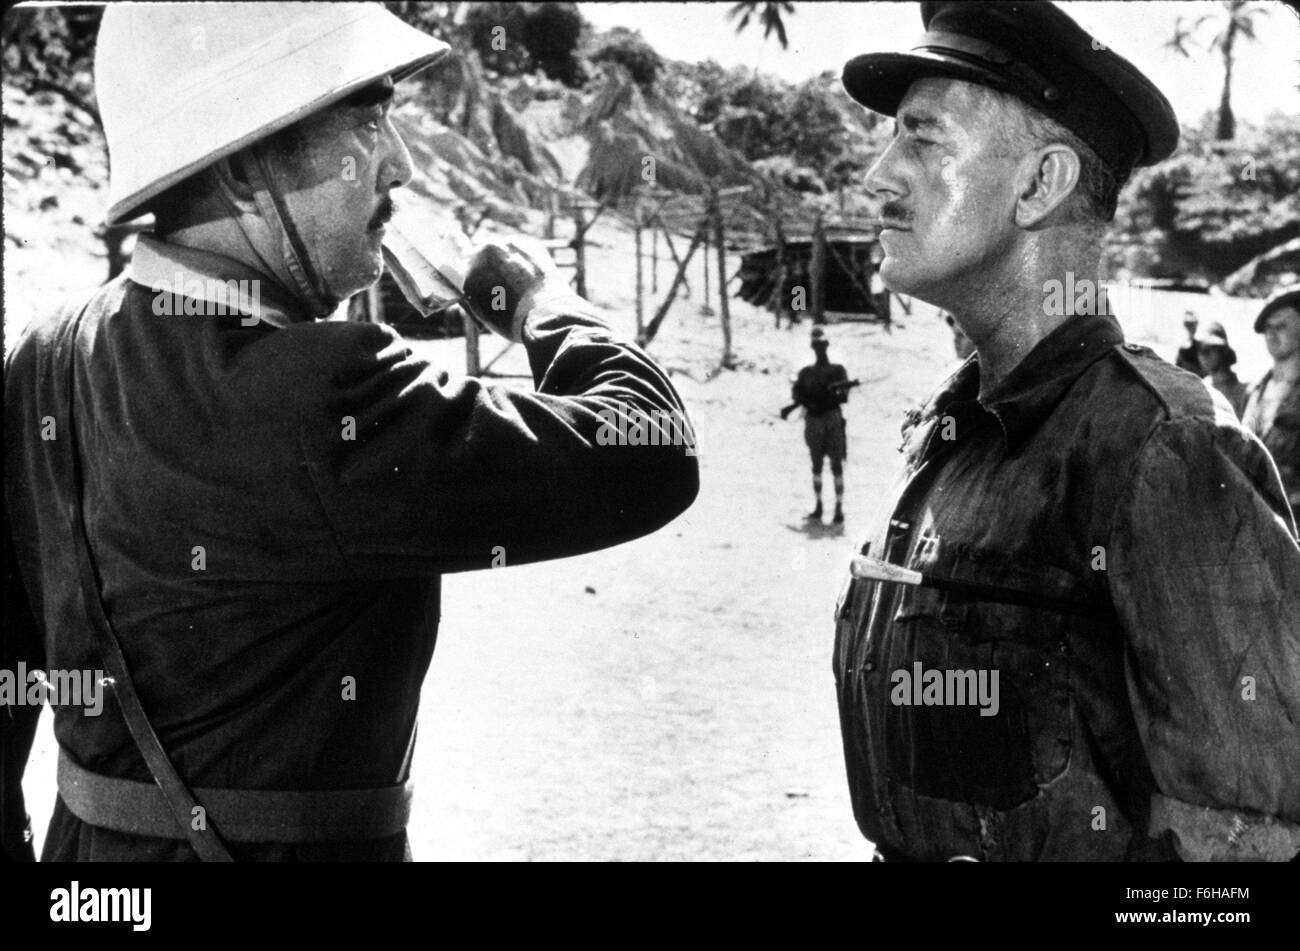 1957, Film Title: BRIDGE ON THE RIVER KWAI, Director: DAVID LEAN, Pictured: 1957, AWARDS - ACADEMY, BEST ACTOR, ALEC GUINNESS, SESSUE HAYAKAWA, INSOLENT, HATE, COMMANDING, ORDER, ATTENTION, ANGRY, MILITARY, UNIFORM, SAND, OUTDOORS, OUTSIDE, SUNNY, BEACH, OSCAR RETRO, OSCAR (MOVIE), INSOLENCE, DEFIANCE, HATRED. (Credit Image: SNAP) Stock Photo